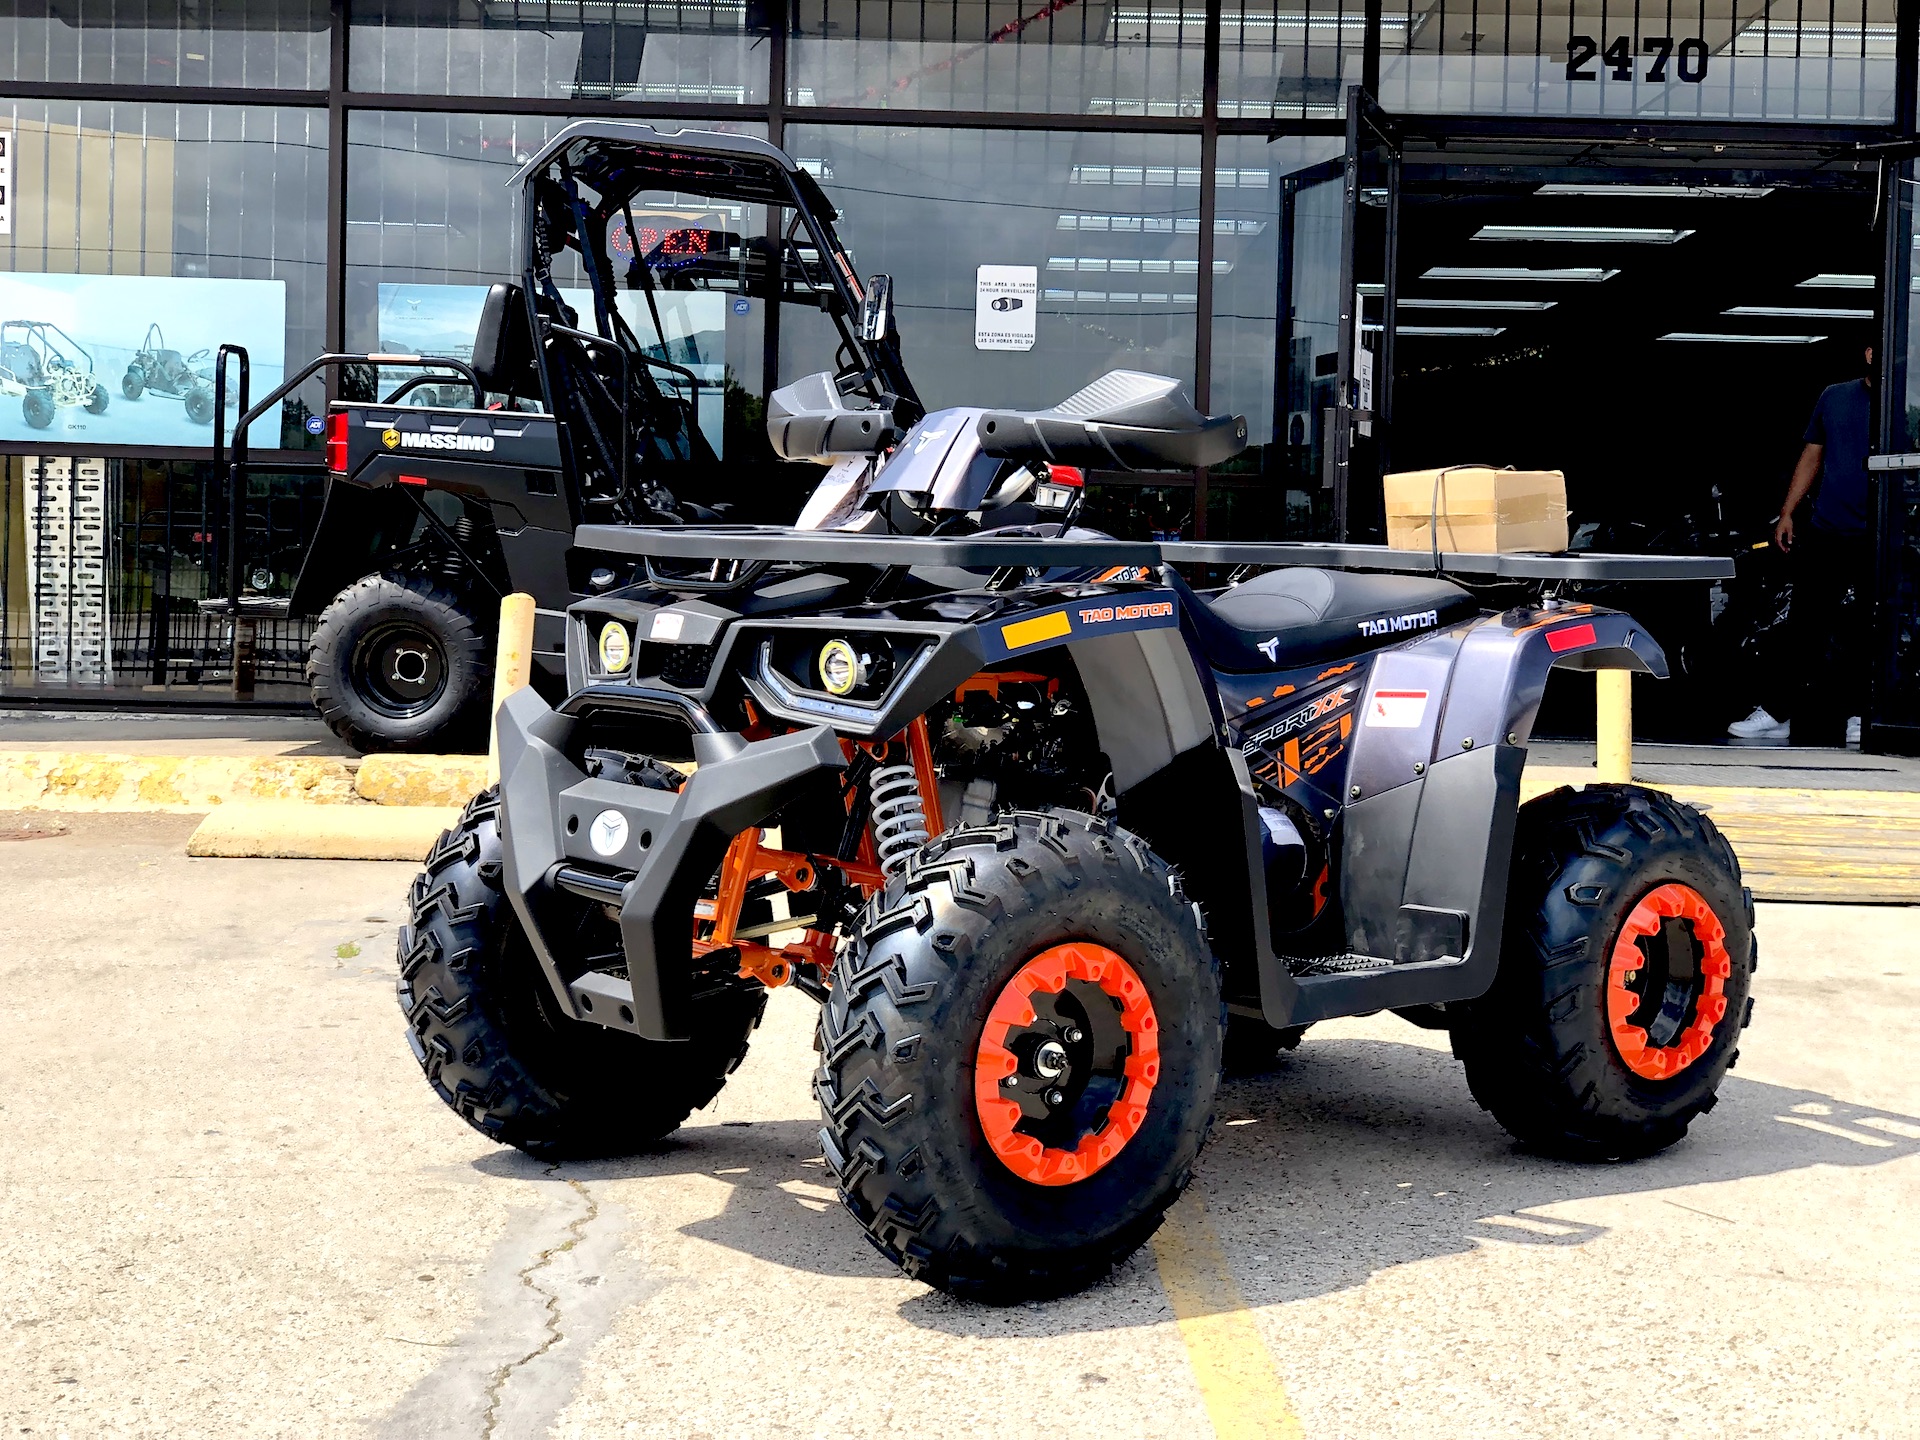 A black and orange atv parked in the street.